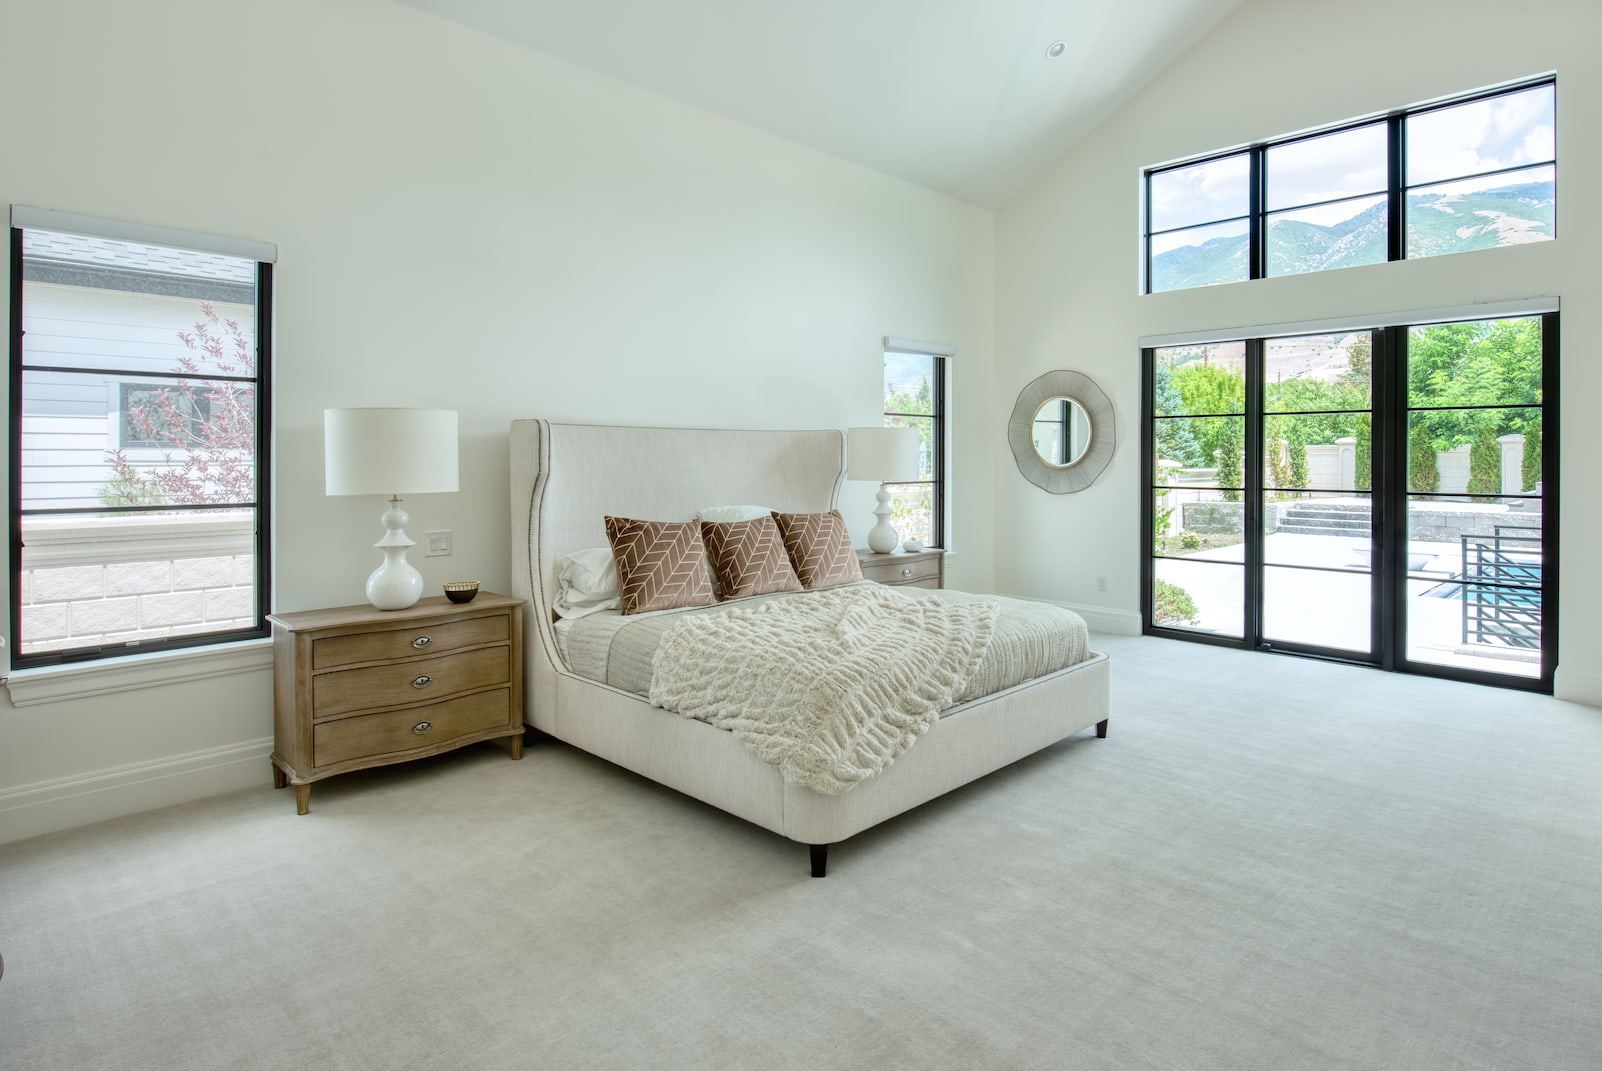 A large bedroom in Utah has a neutral-colored bed positioned between two casement windows and a black sliding glass door on the far wall.